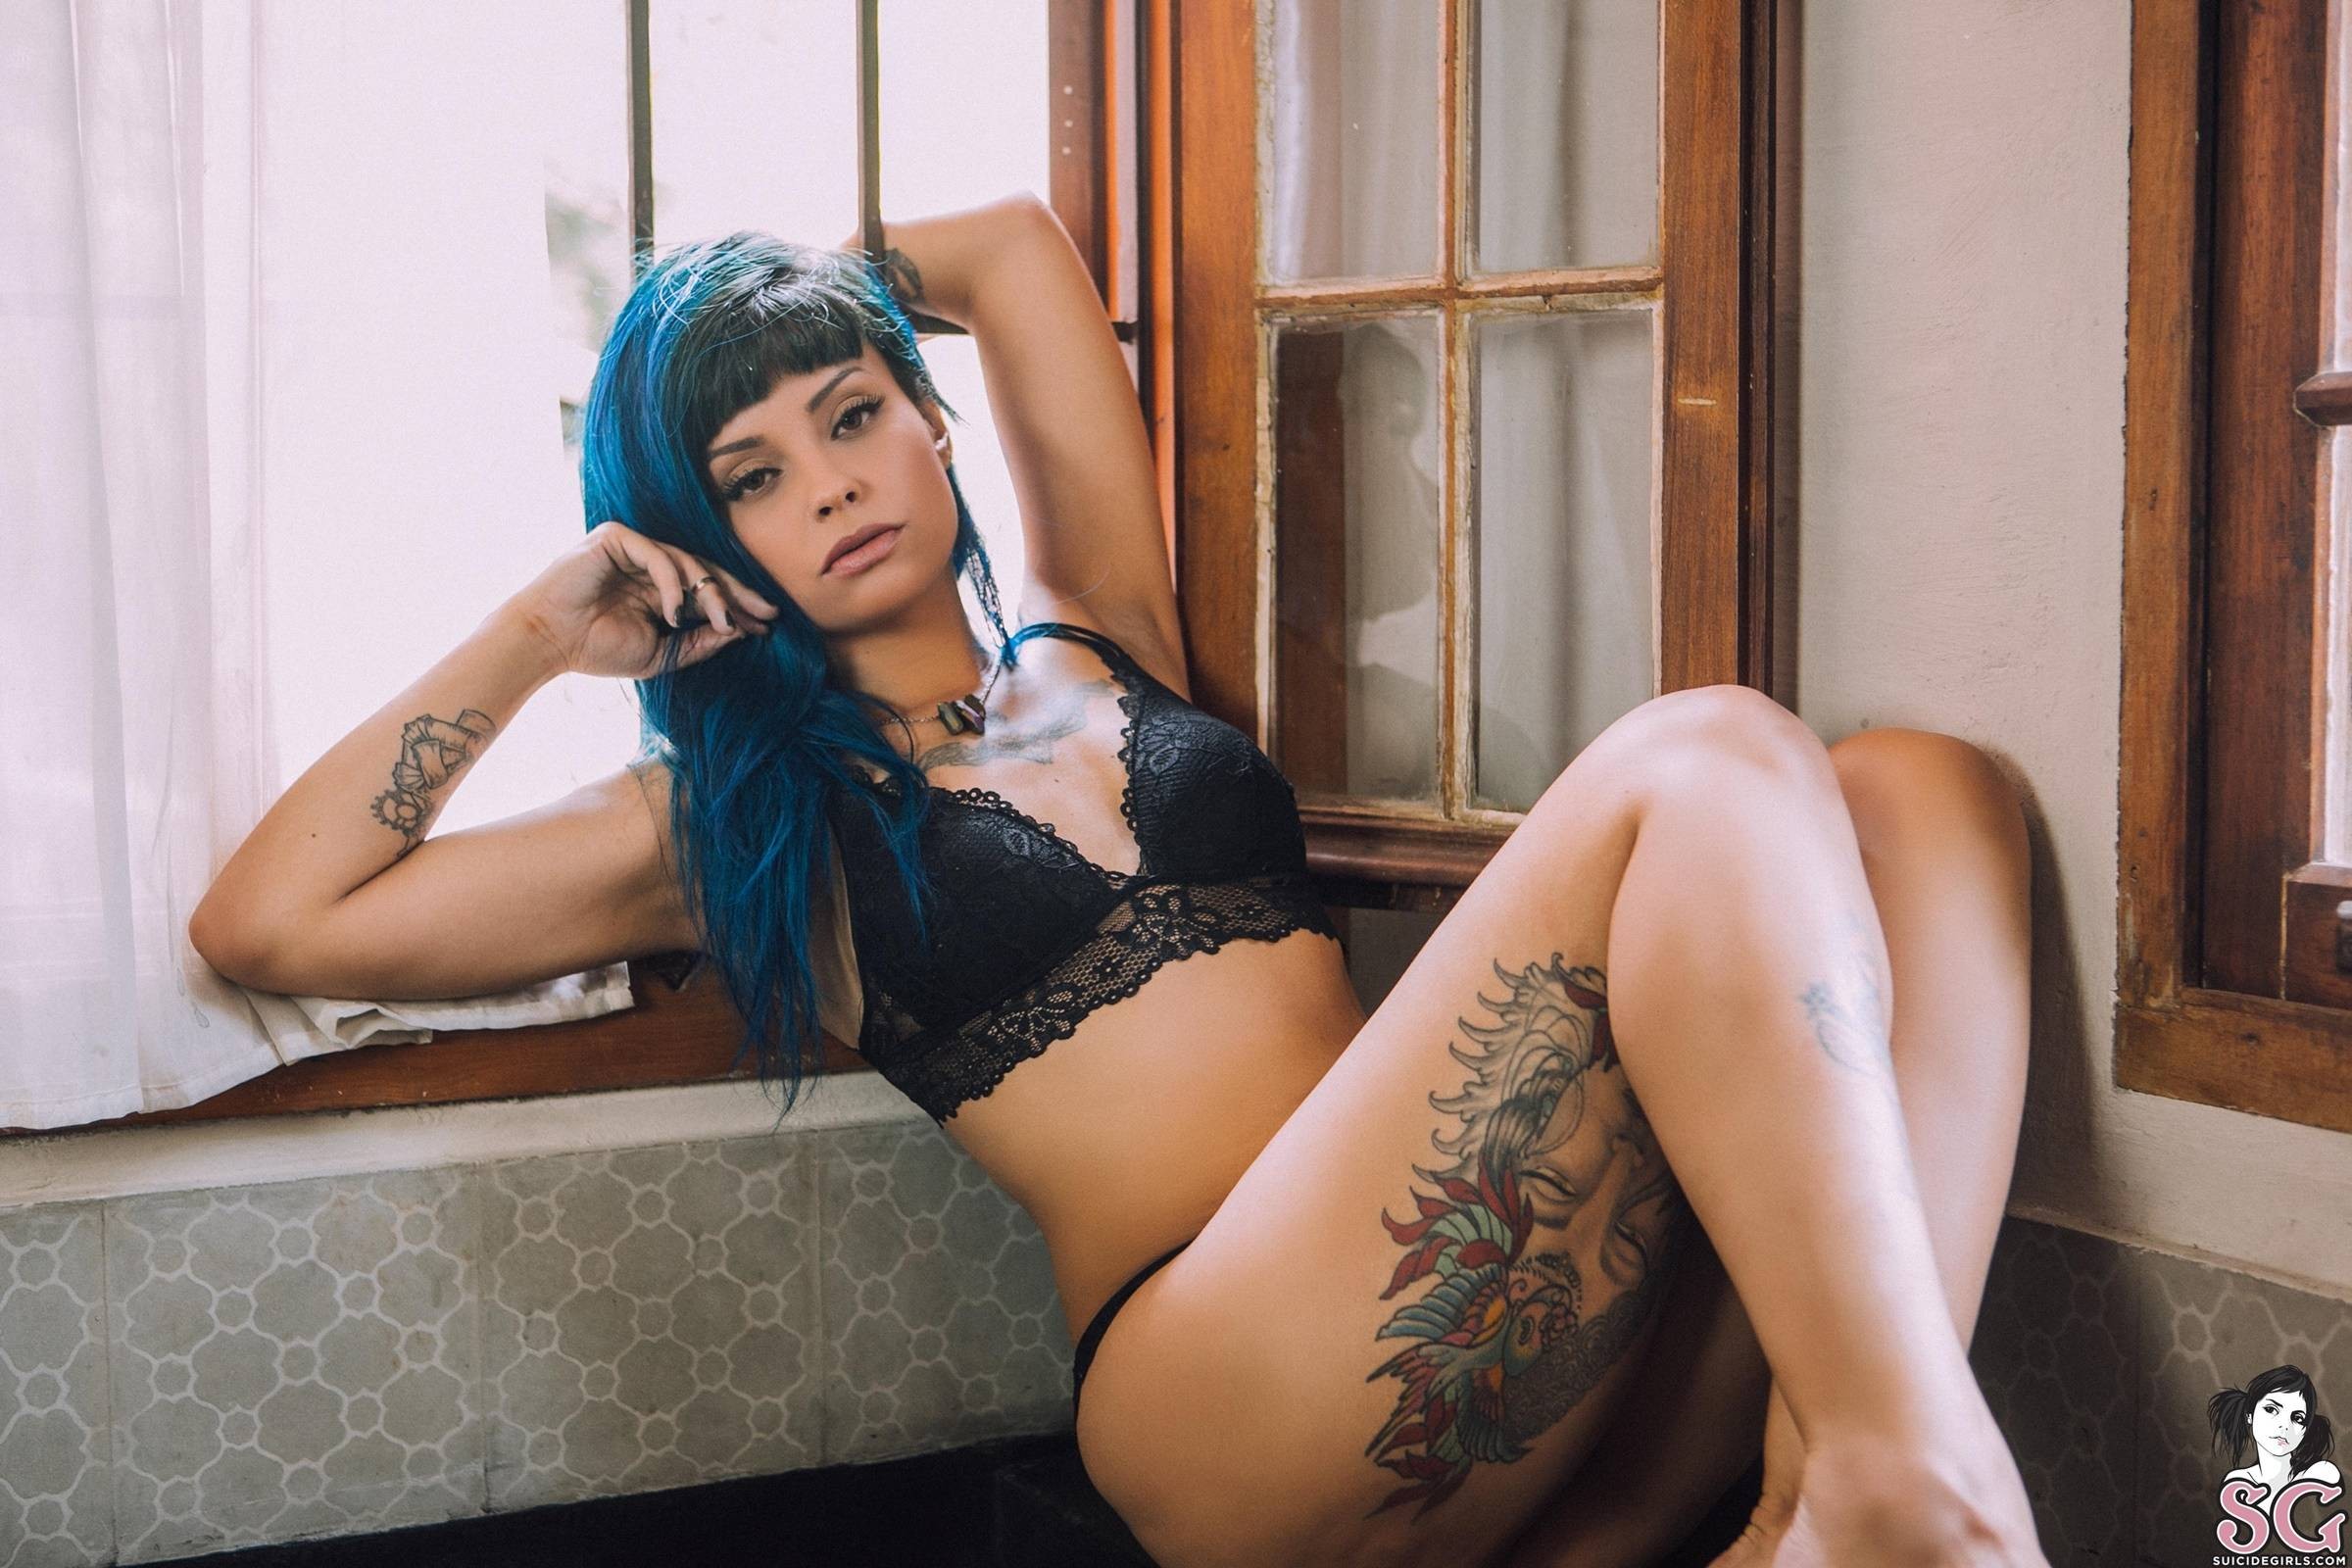 Suicide Girl Flaviah Moonage Daydream (18) High resolution lossless iPhone ...